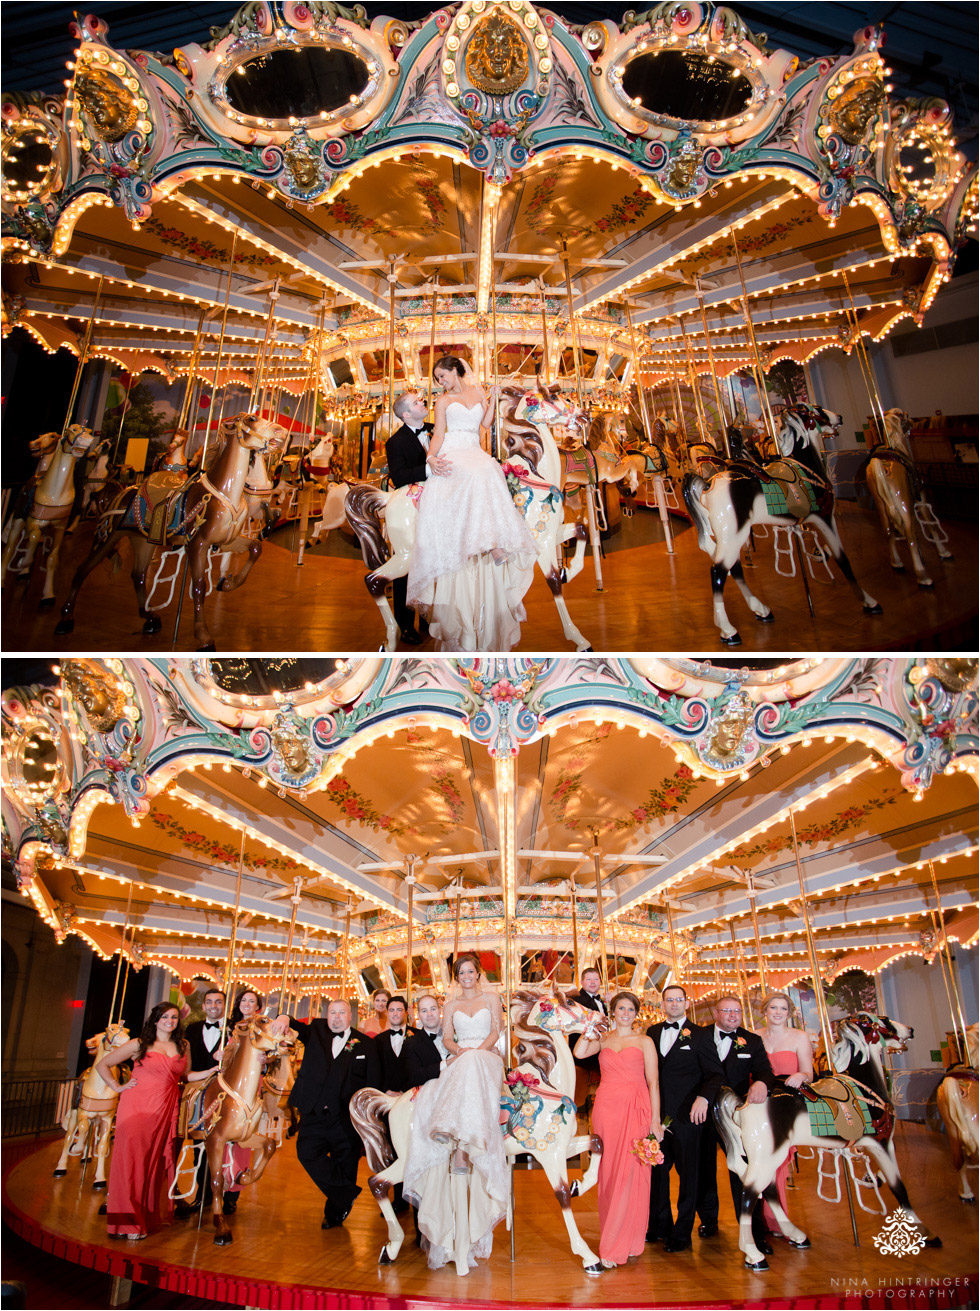 Bride and groom and bridal party at Carousel House at Please Touch Museum in Philadelphia, Pennsylvania - Blog of Nina Hintringer Photography - Wedding Photography, Wedding Reportage and Destination Weddings